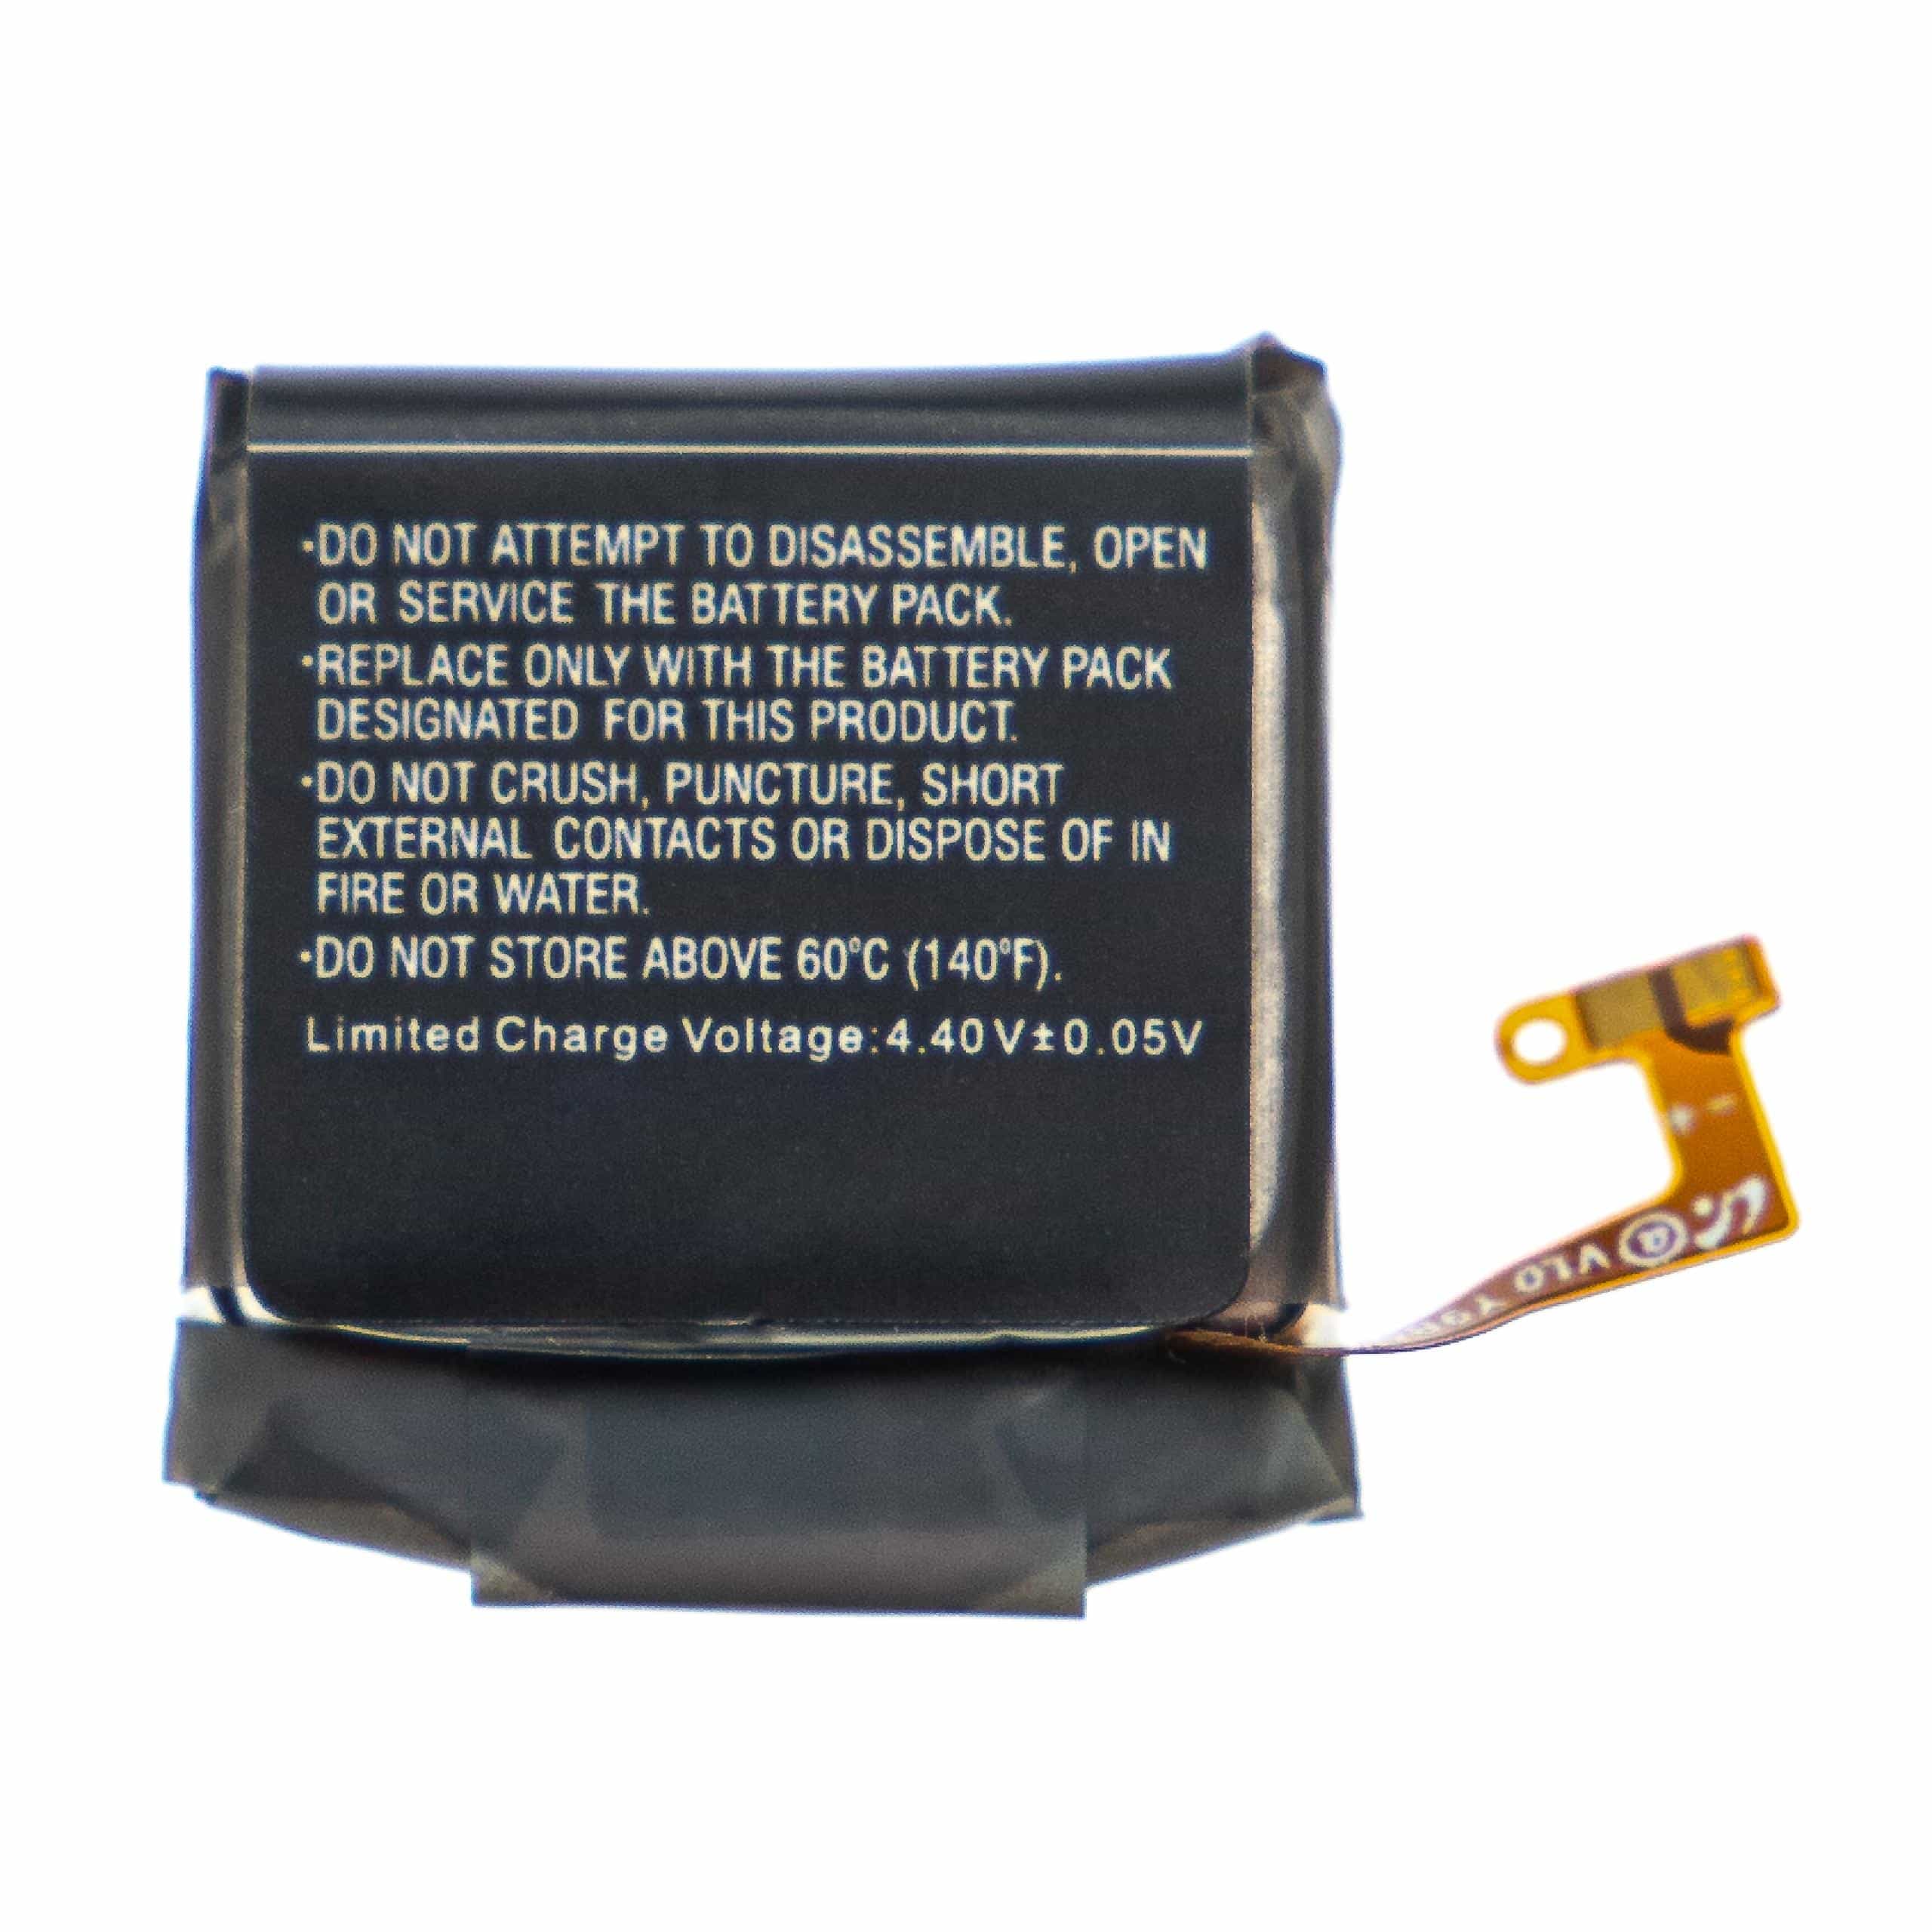 Smartwatch Battery Replacement for Samsung EB-BR830ABY, GH43-04968A - 220mAh 3.85V Li-polymer